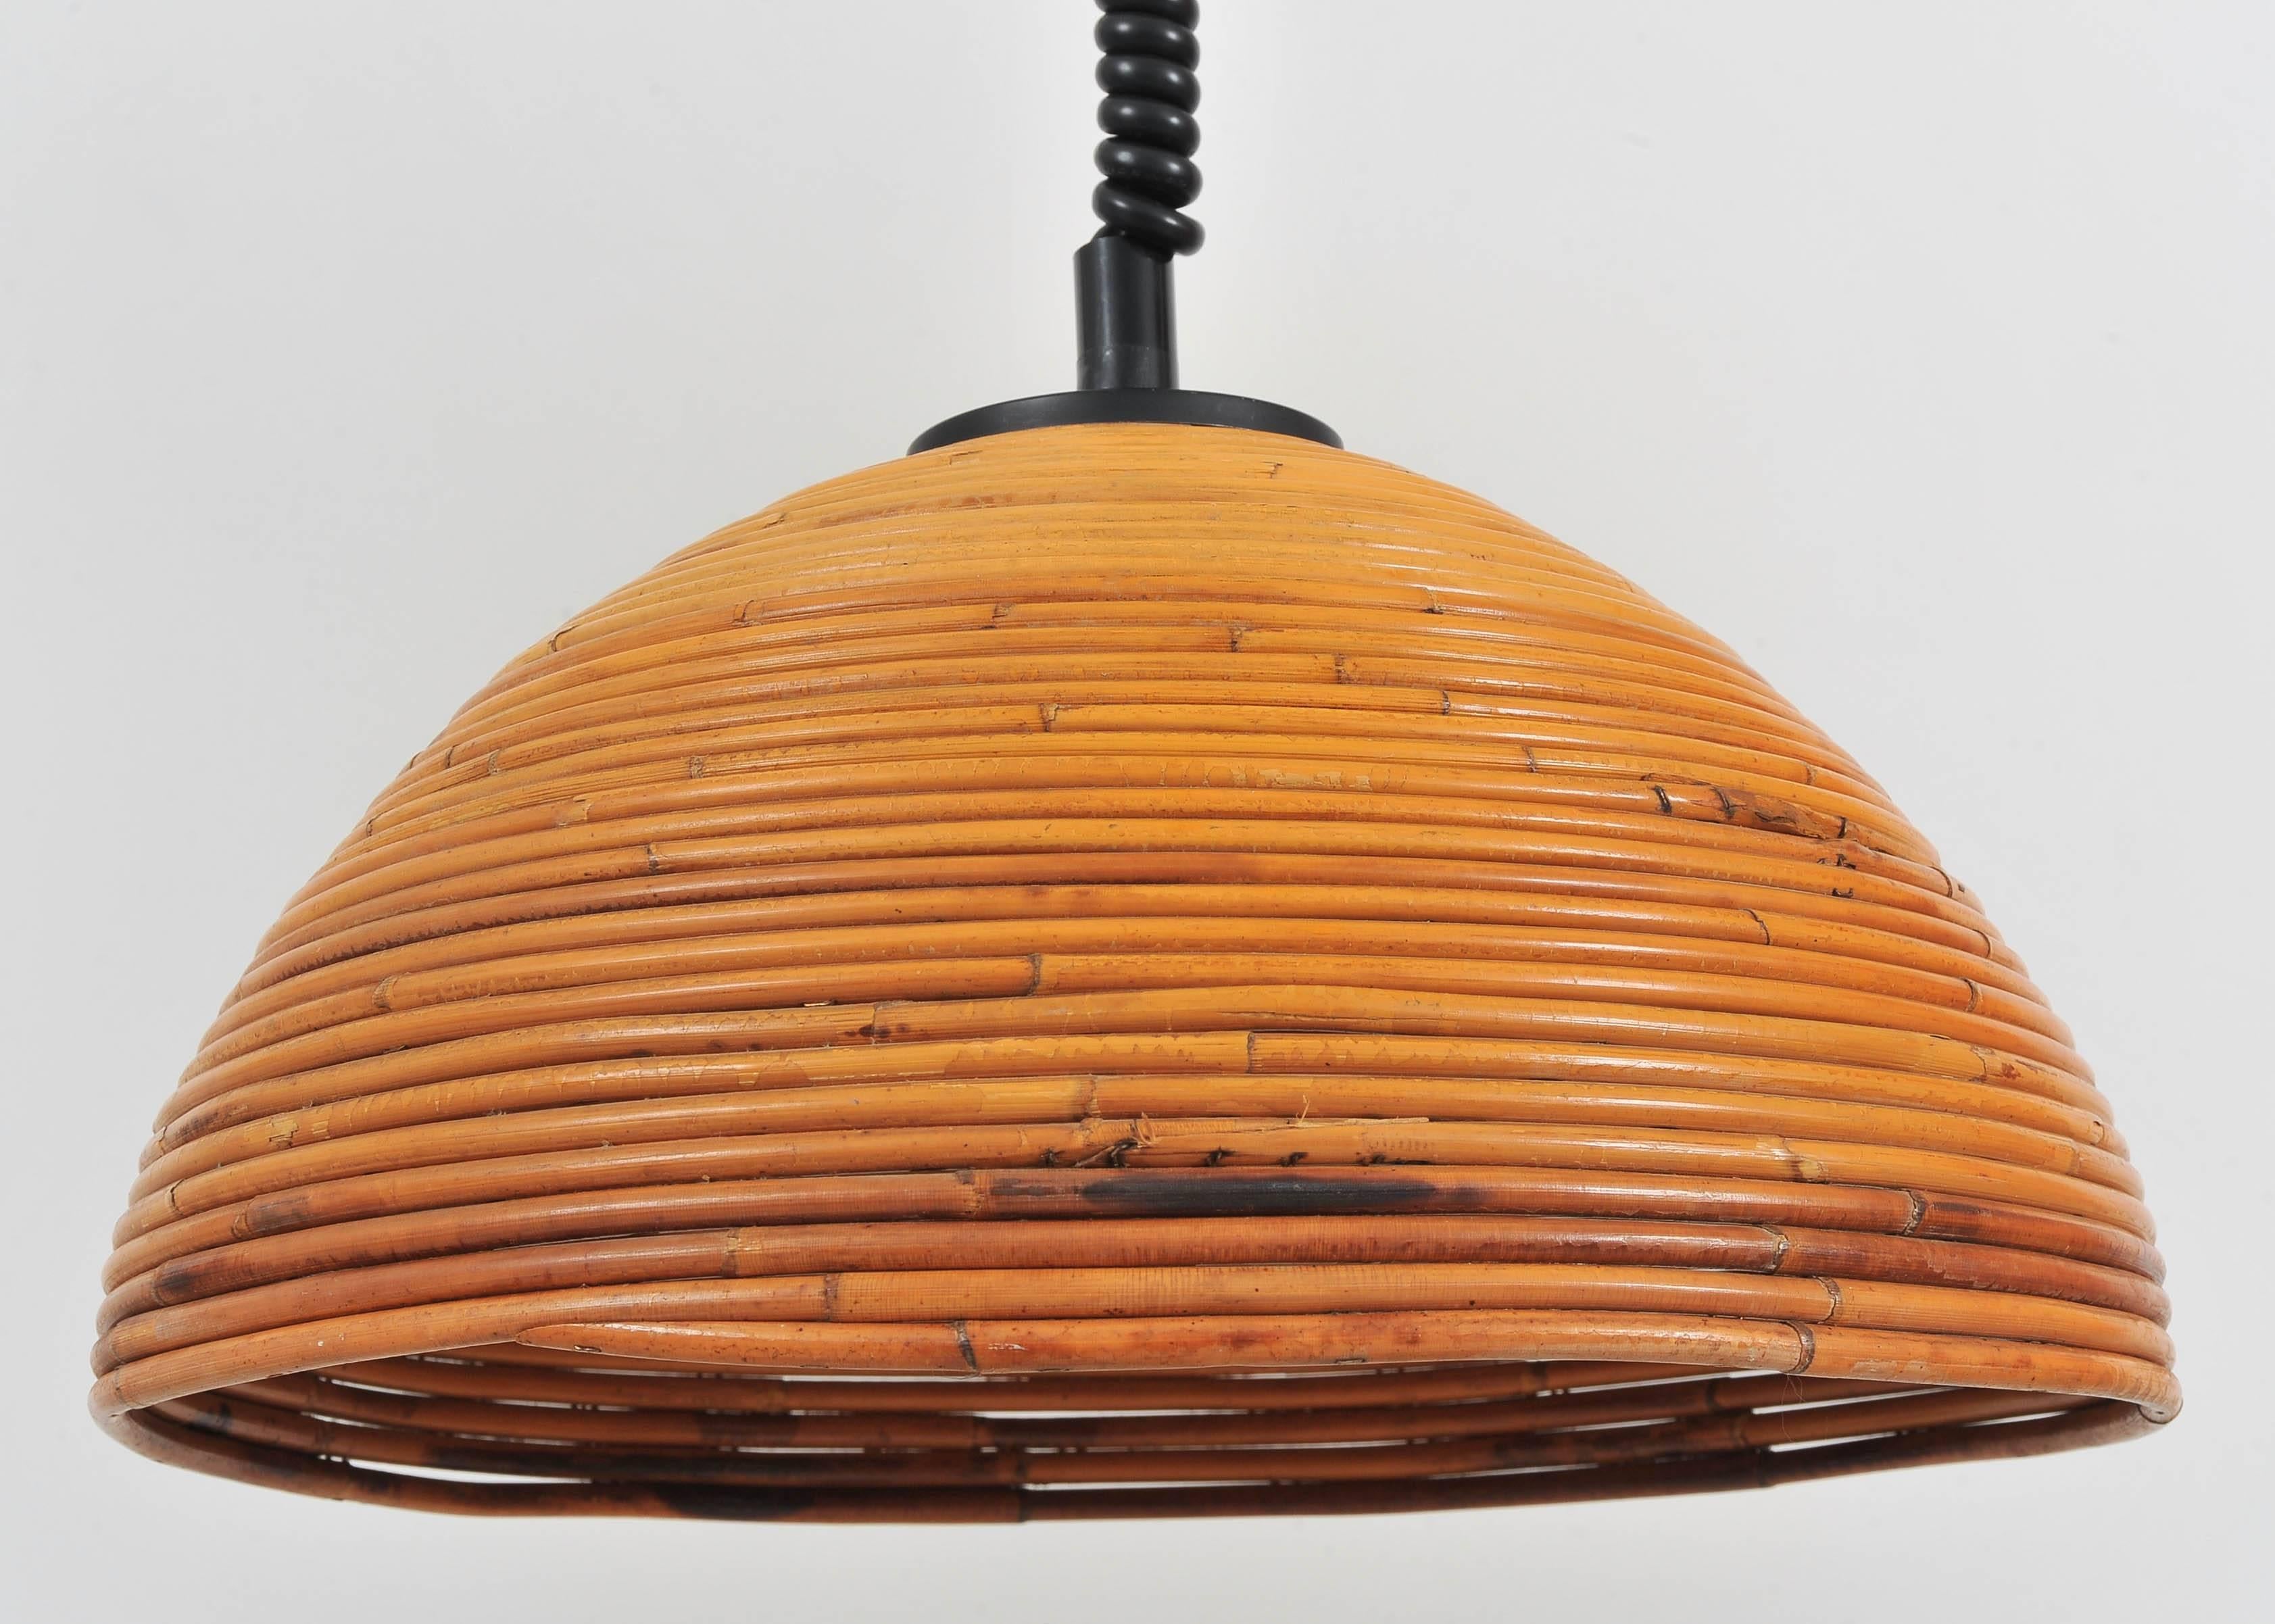 This fantastic Mid-Century light is on a spiral wire so that the height can be adjusted. The rattan shade is a lovely warm color and is a good size. Would work really well over a dining table or in an office.

This light has been fully rewired and